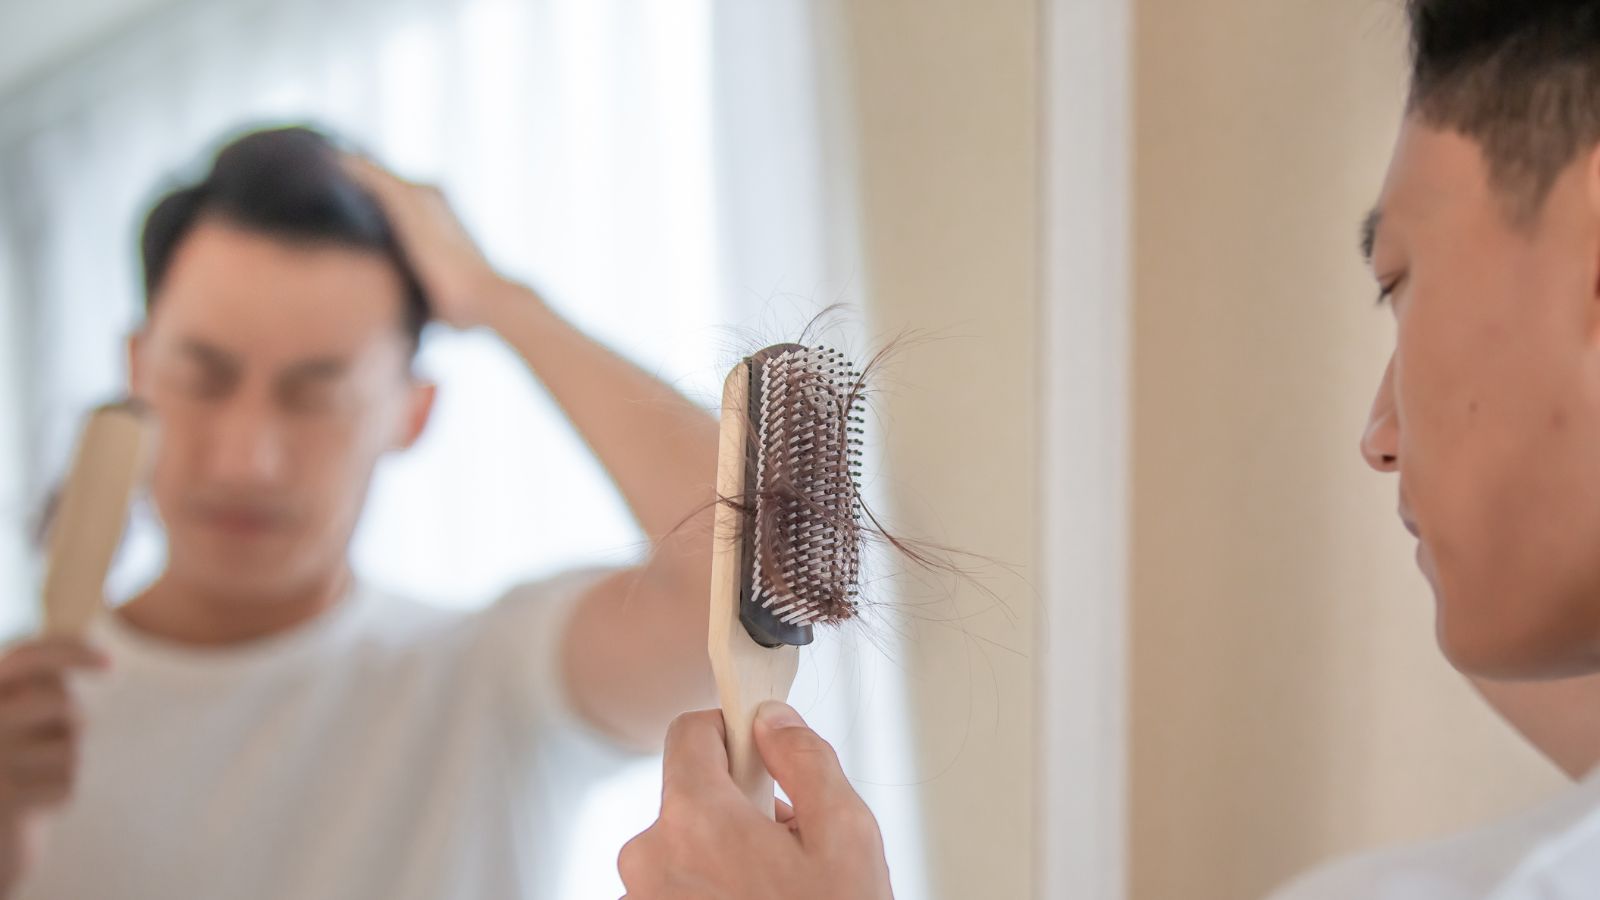 The Asian man notices that he has filled the comb with his fallen hair, which concerns him and raises suspicions about whether he is experiencing male pattern baldness symptoms